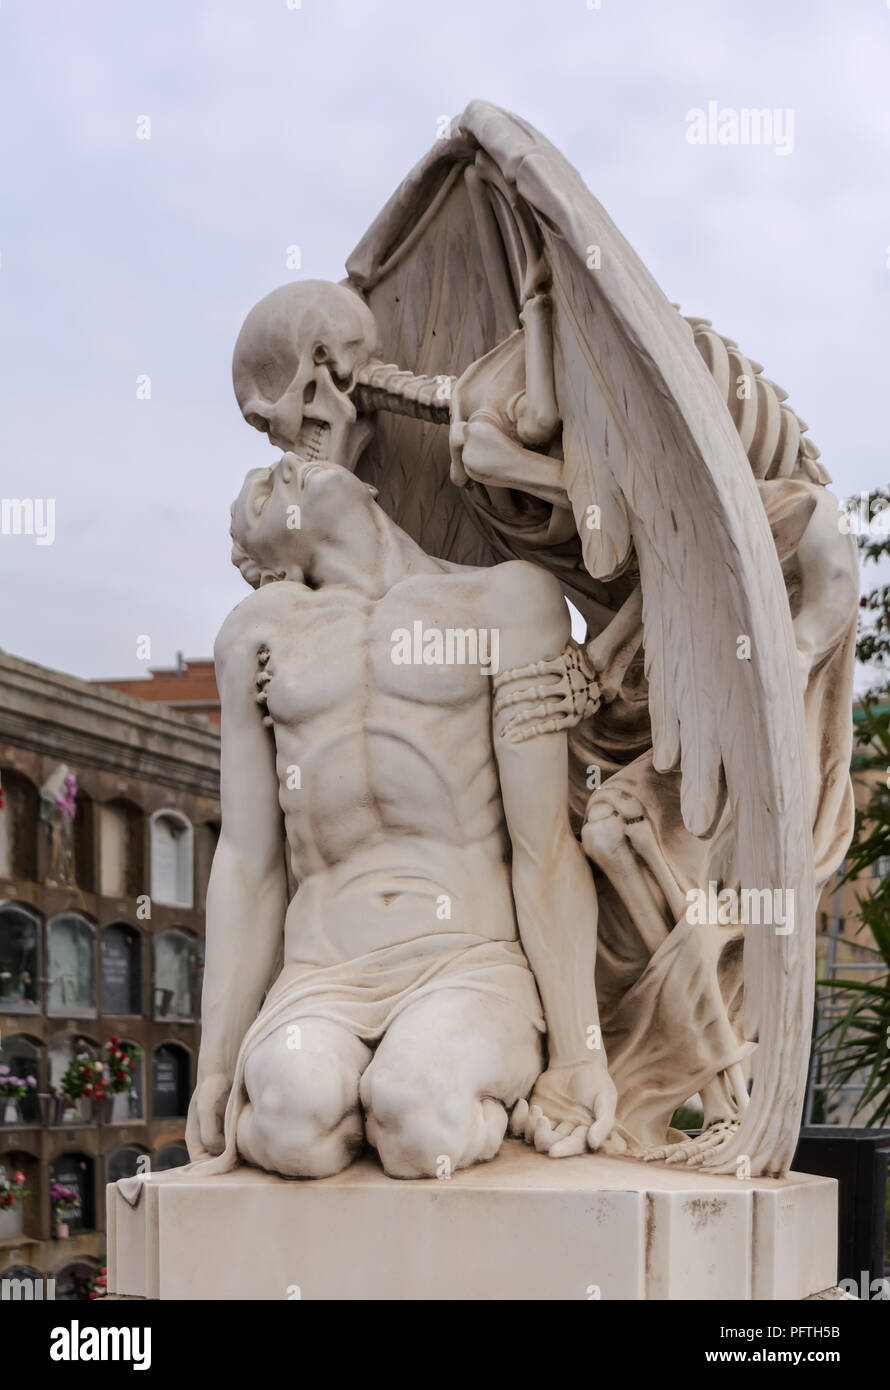 The Kiss Of Death Statue In Poblenou Cemetery In Barcelona This Marble Sculpture Depicts Death As A Winged Skeleton Kissing A Handsome Young Man T Stock Photo Alamy